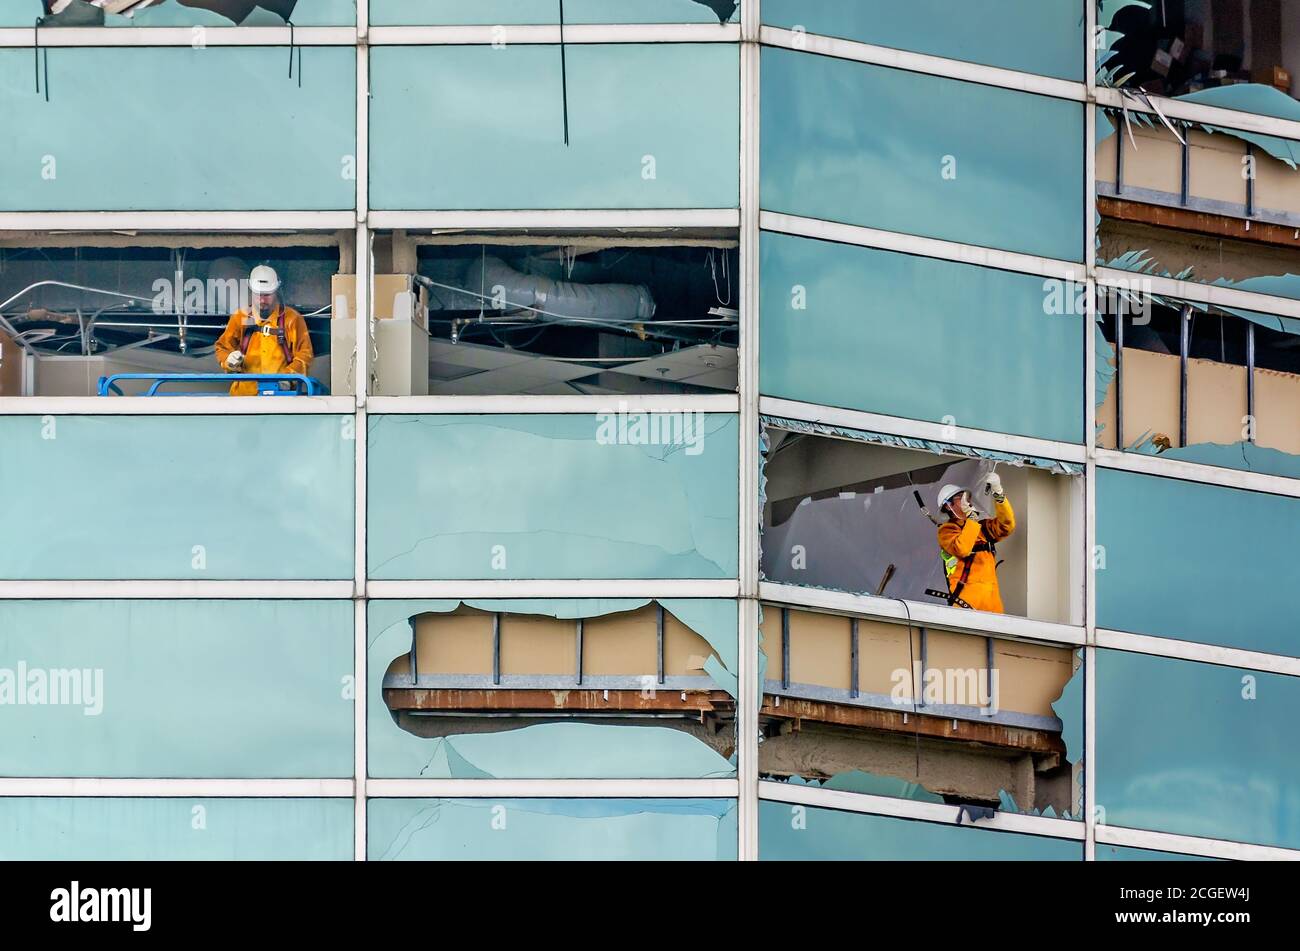 Workers remove the shattered glass from windows at the Capital One Tower after Hurricane Laura, Sept. 9, 2020, in Lake Charles, Louisiana. Stock Photo